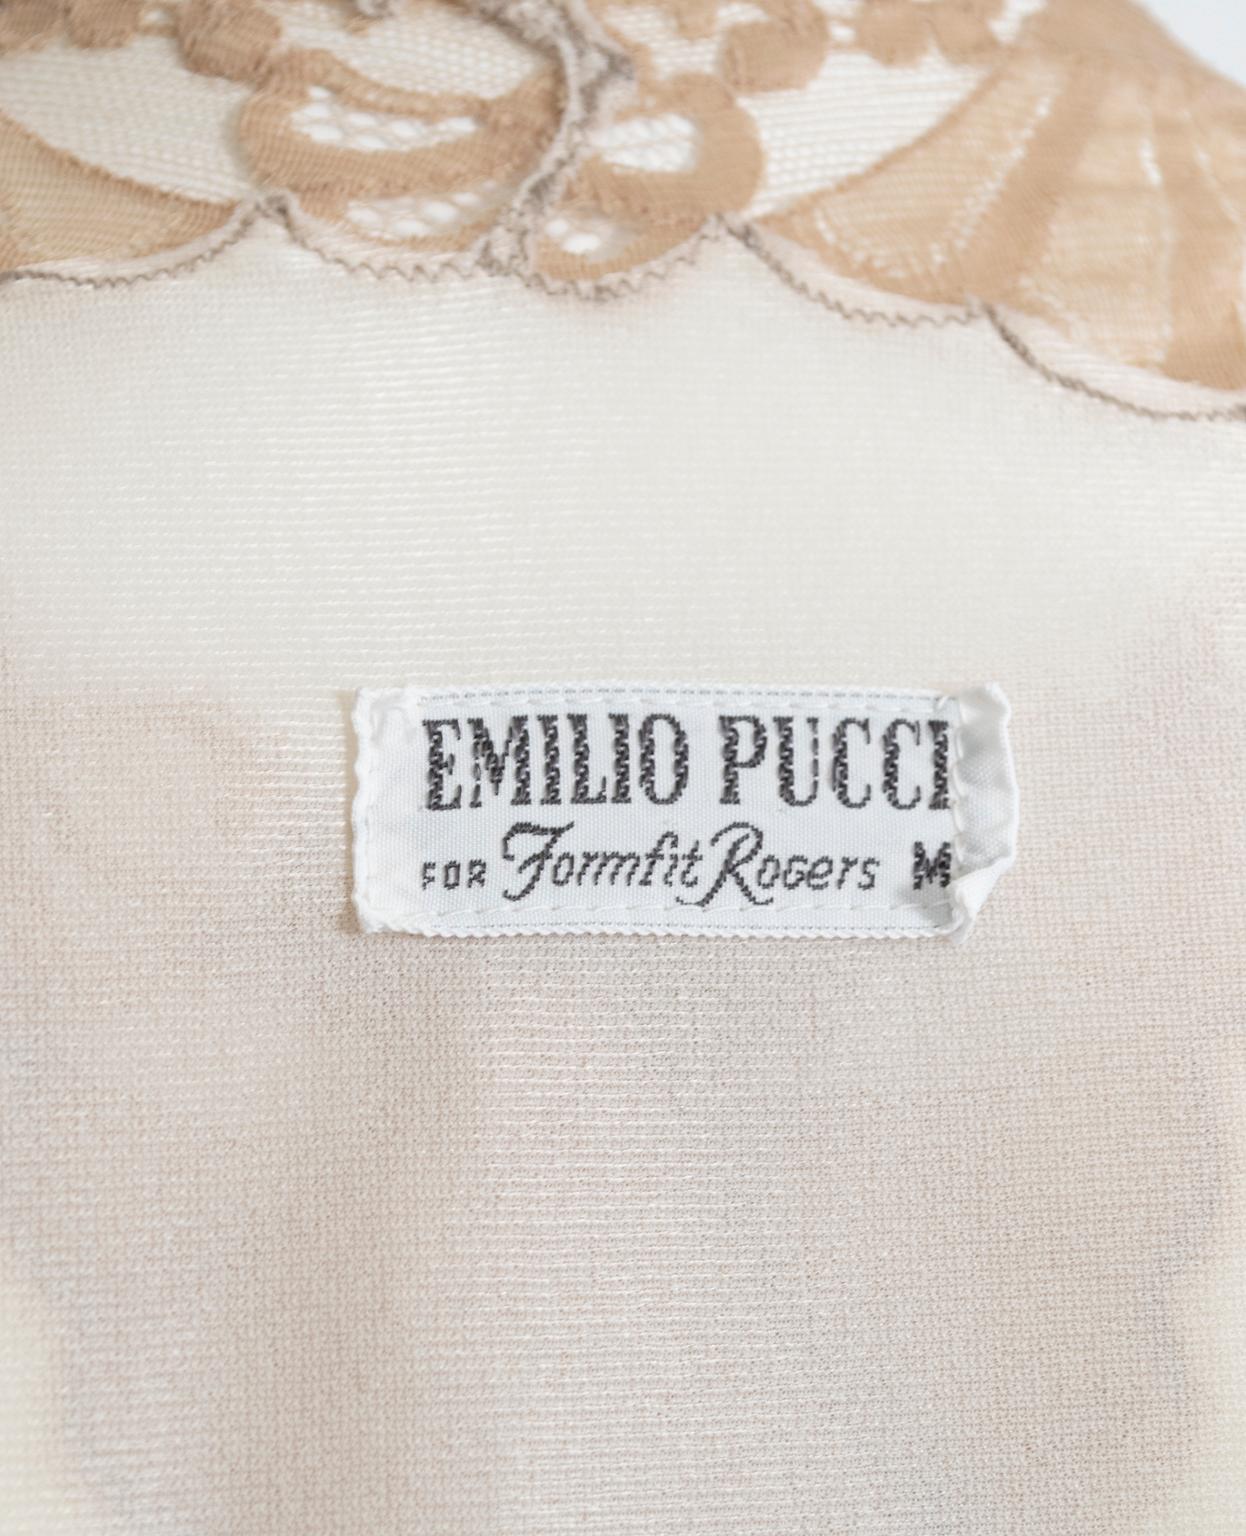 Emilio Pucci Formfit Rogers Ivory Bridal Peignoir Gown and Robe Set – M, 1960s 6